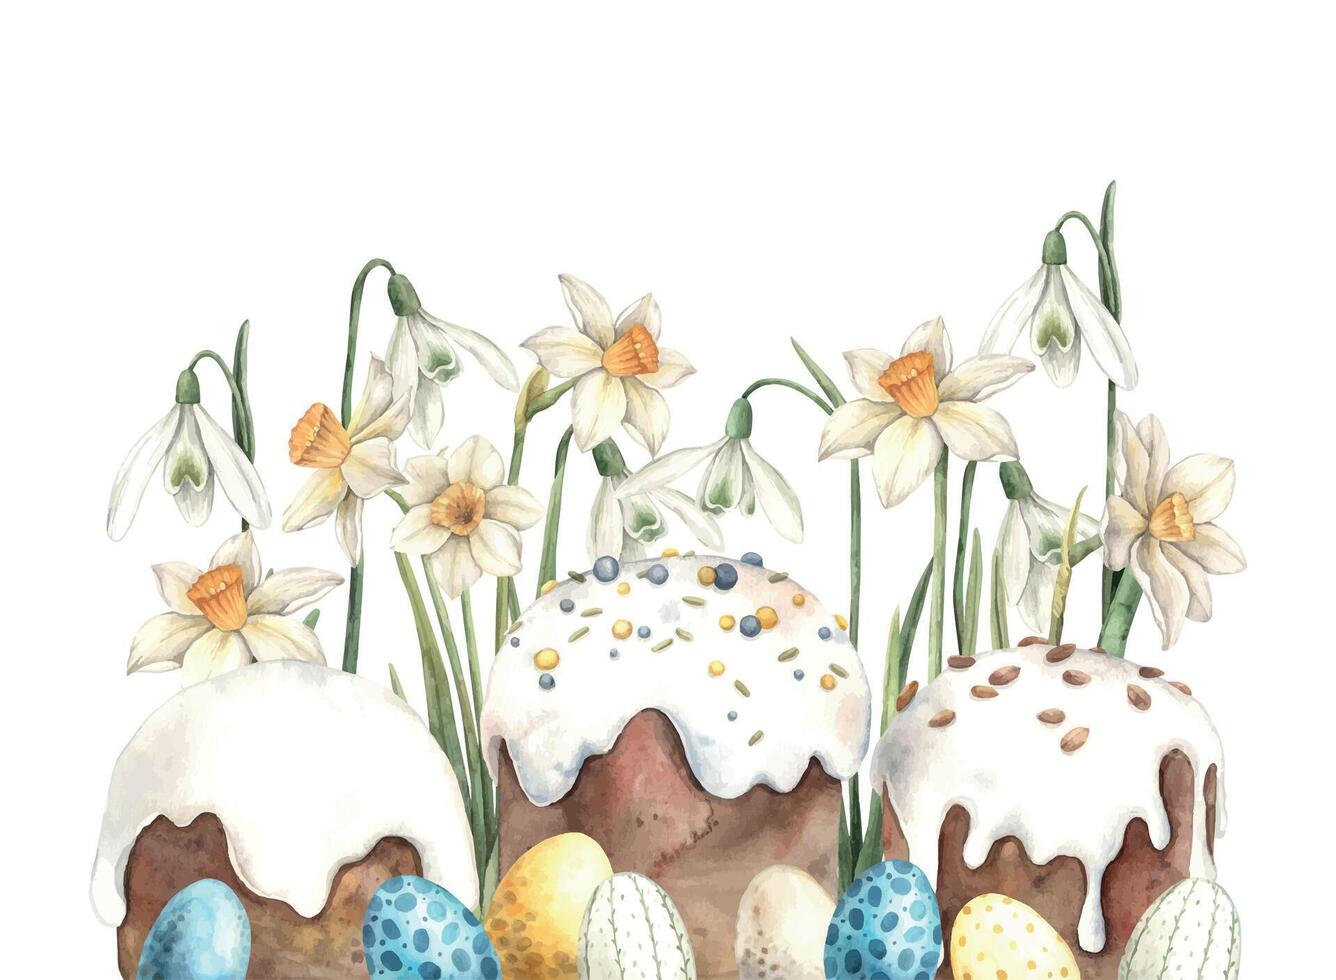 Watercolor Easter composition with Easter cakes, eggs and daffodils. Hand drawn illustrations on isolated background for greeting cards, invitations, happy holidays, posters, graphic design, print vector